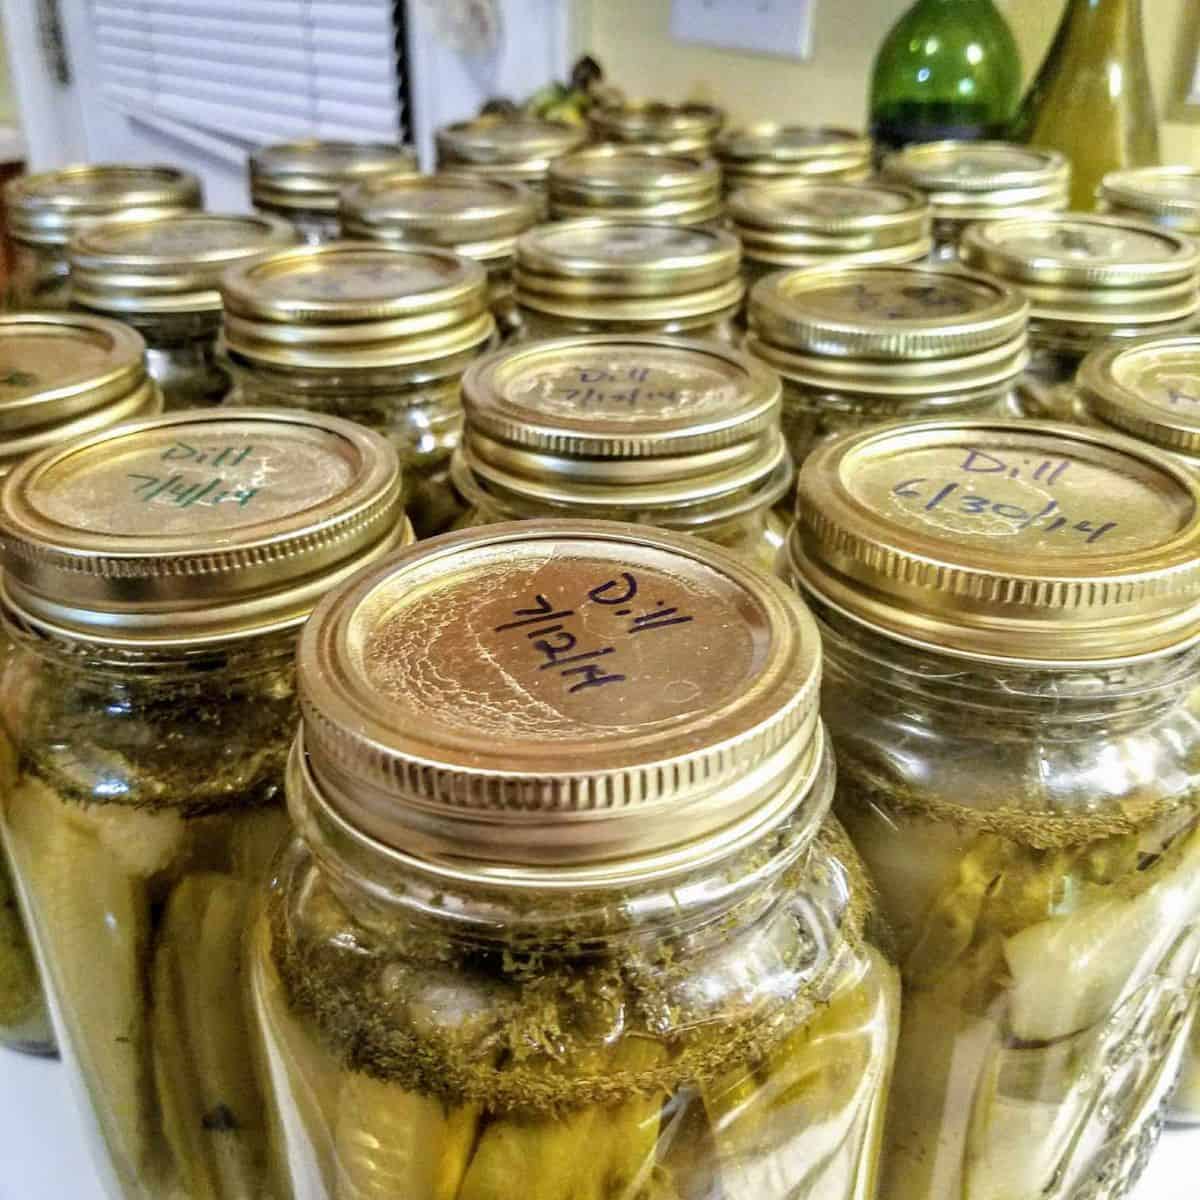 Counter full of jars of pickles.